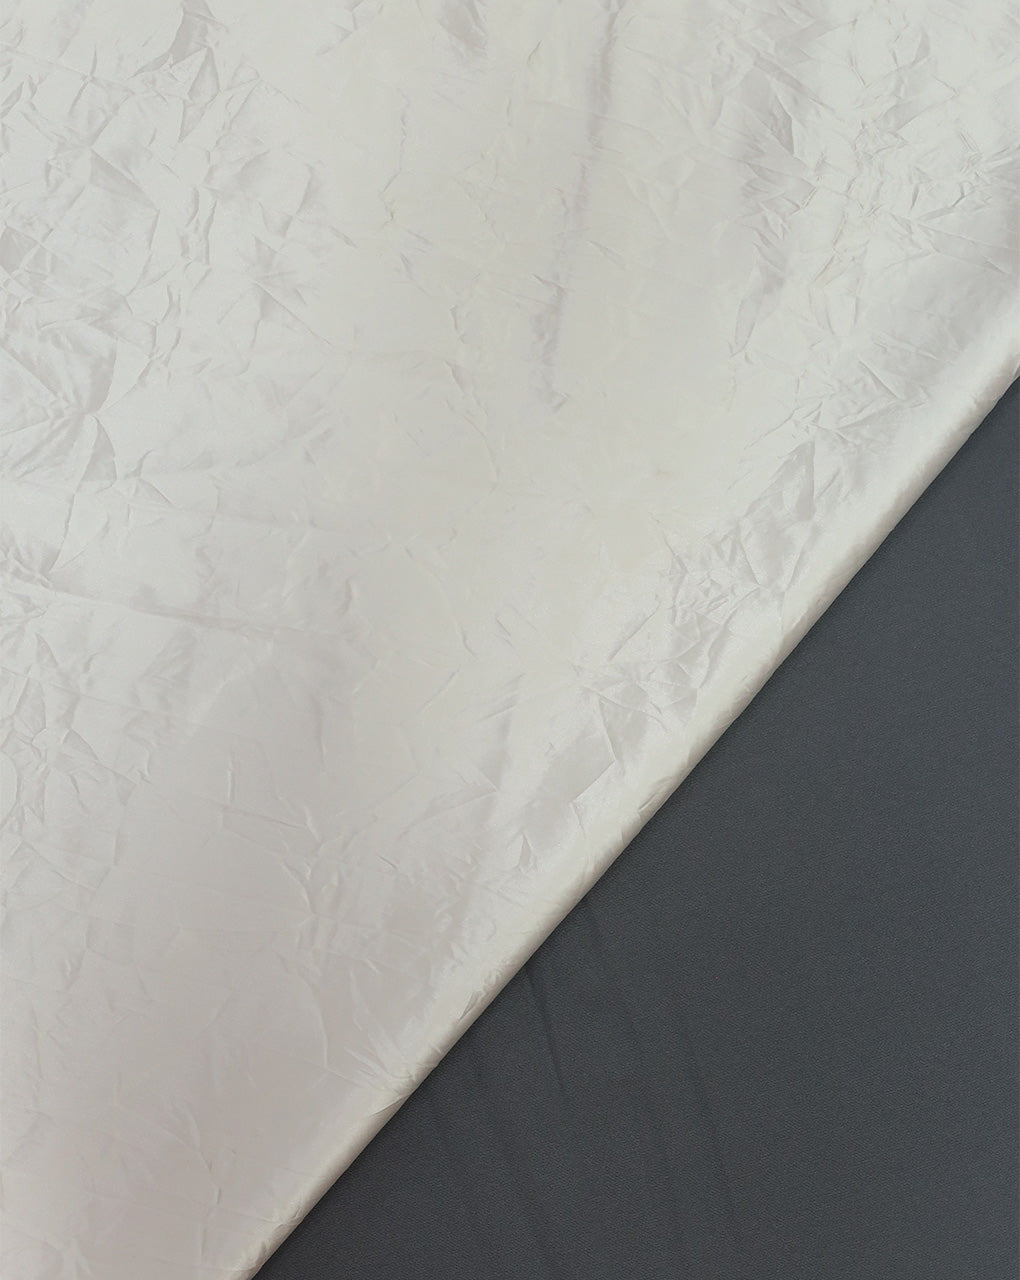 WHITE CRUSHED POLYESTER SATIN FABRIC